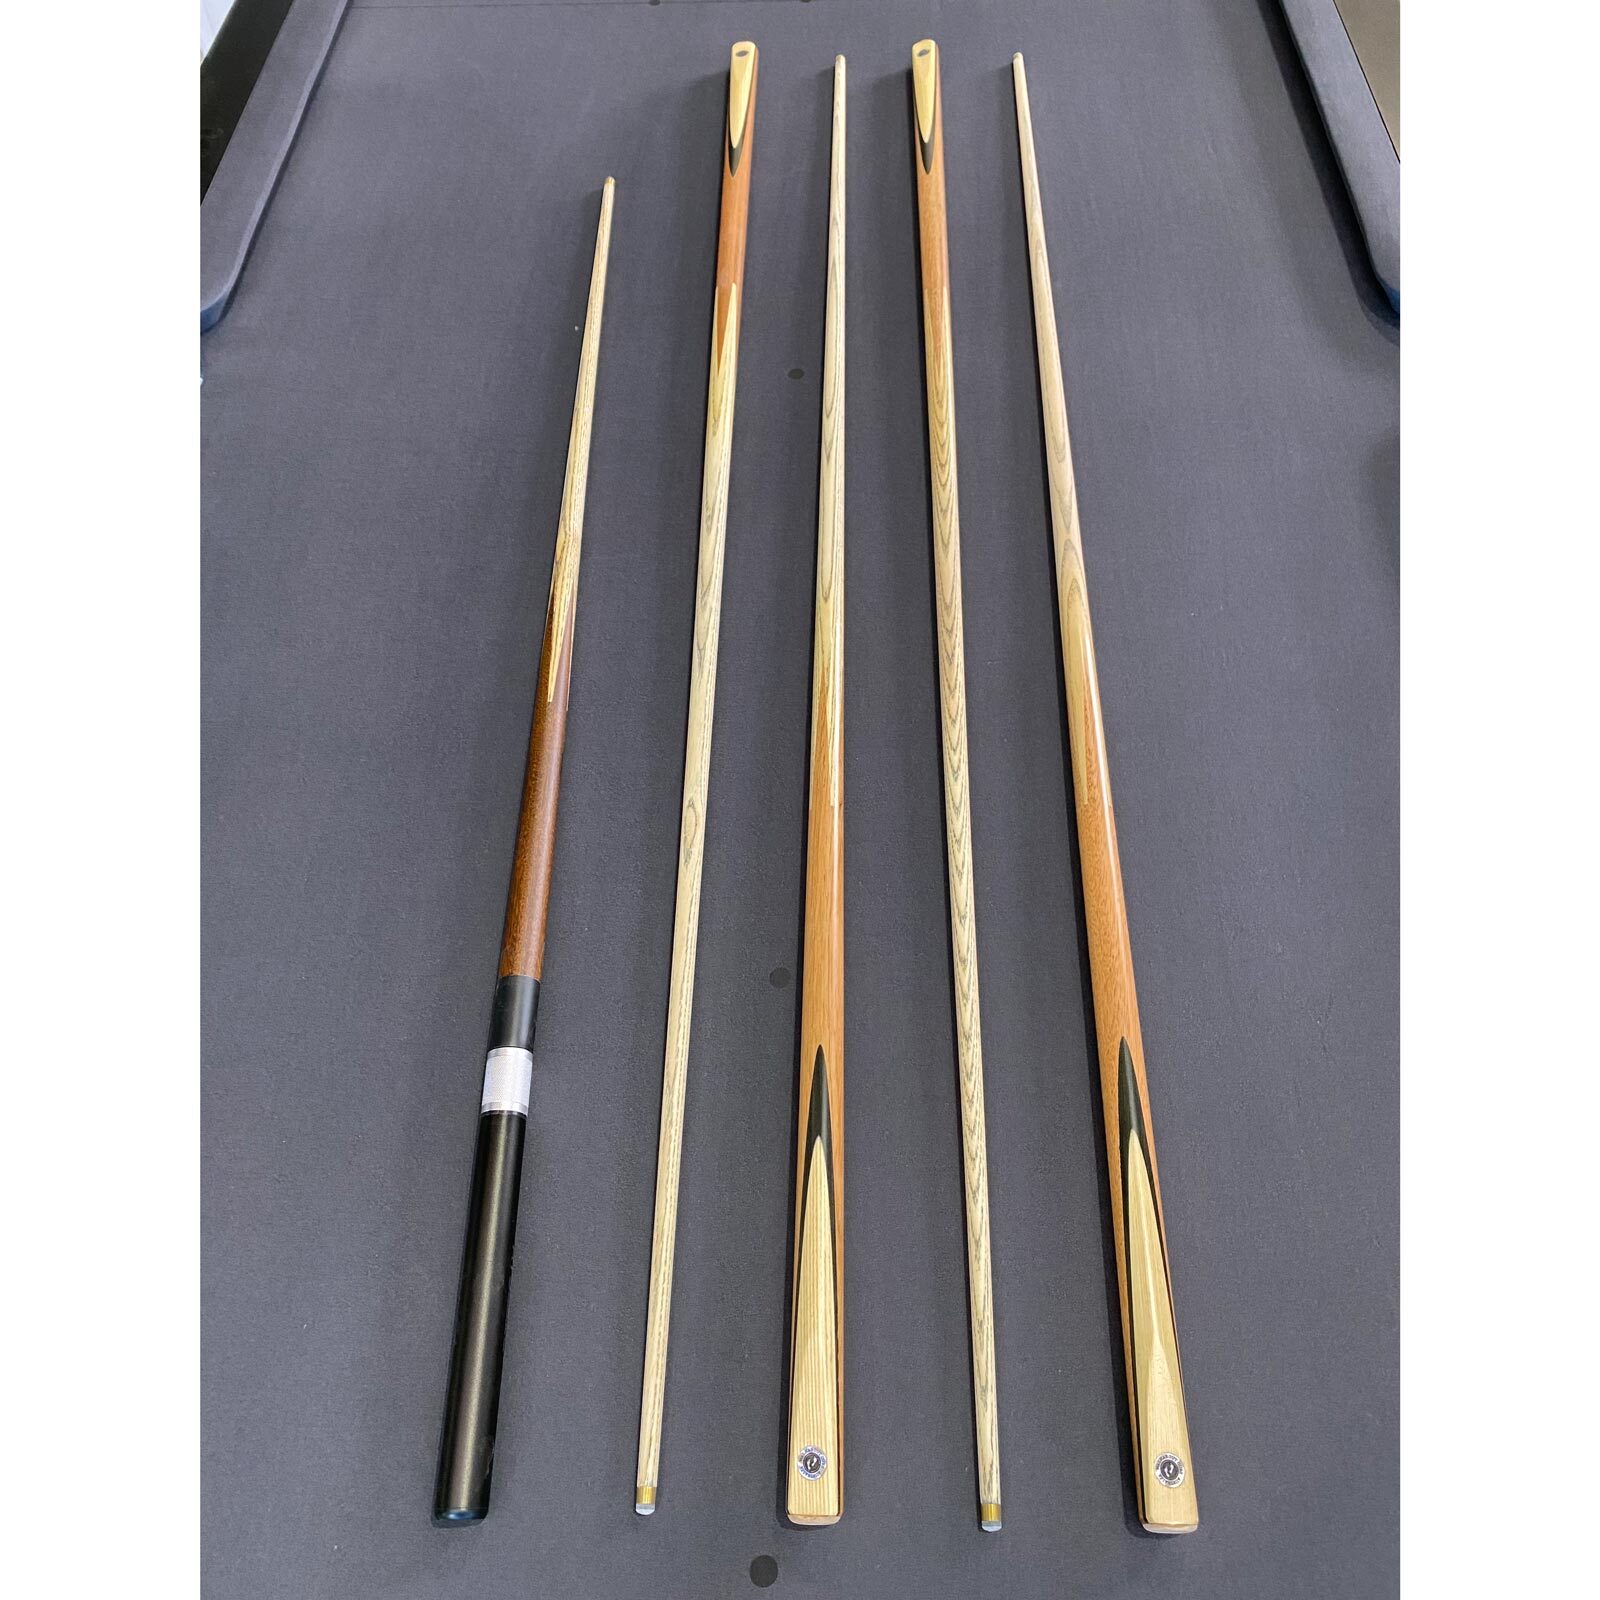 Pool cue value pack, with one 48 inch telescopic cue